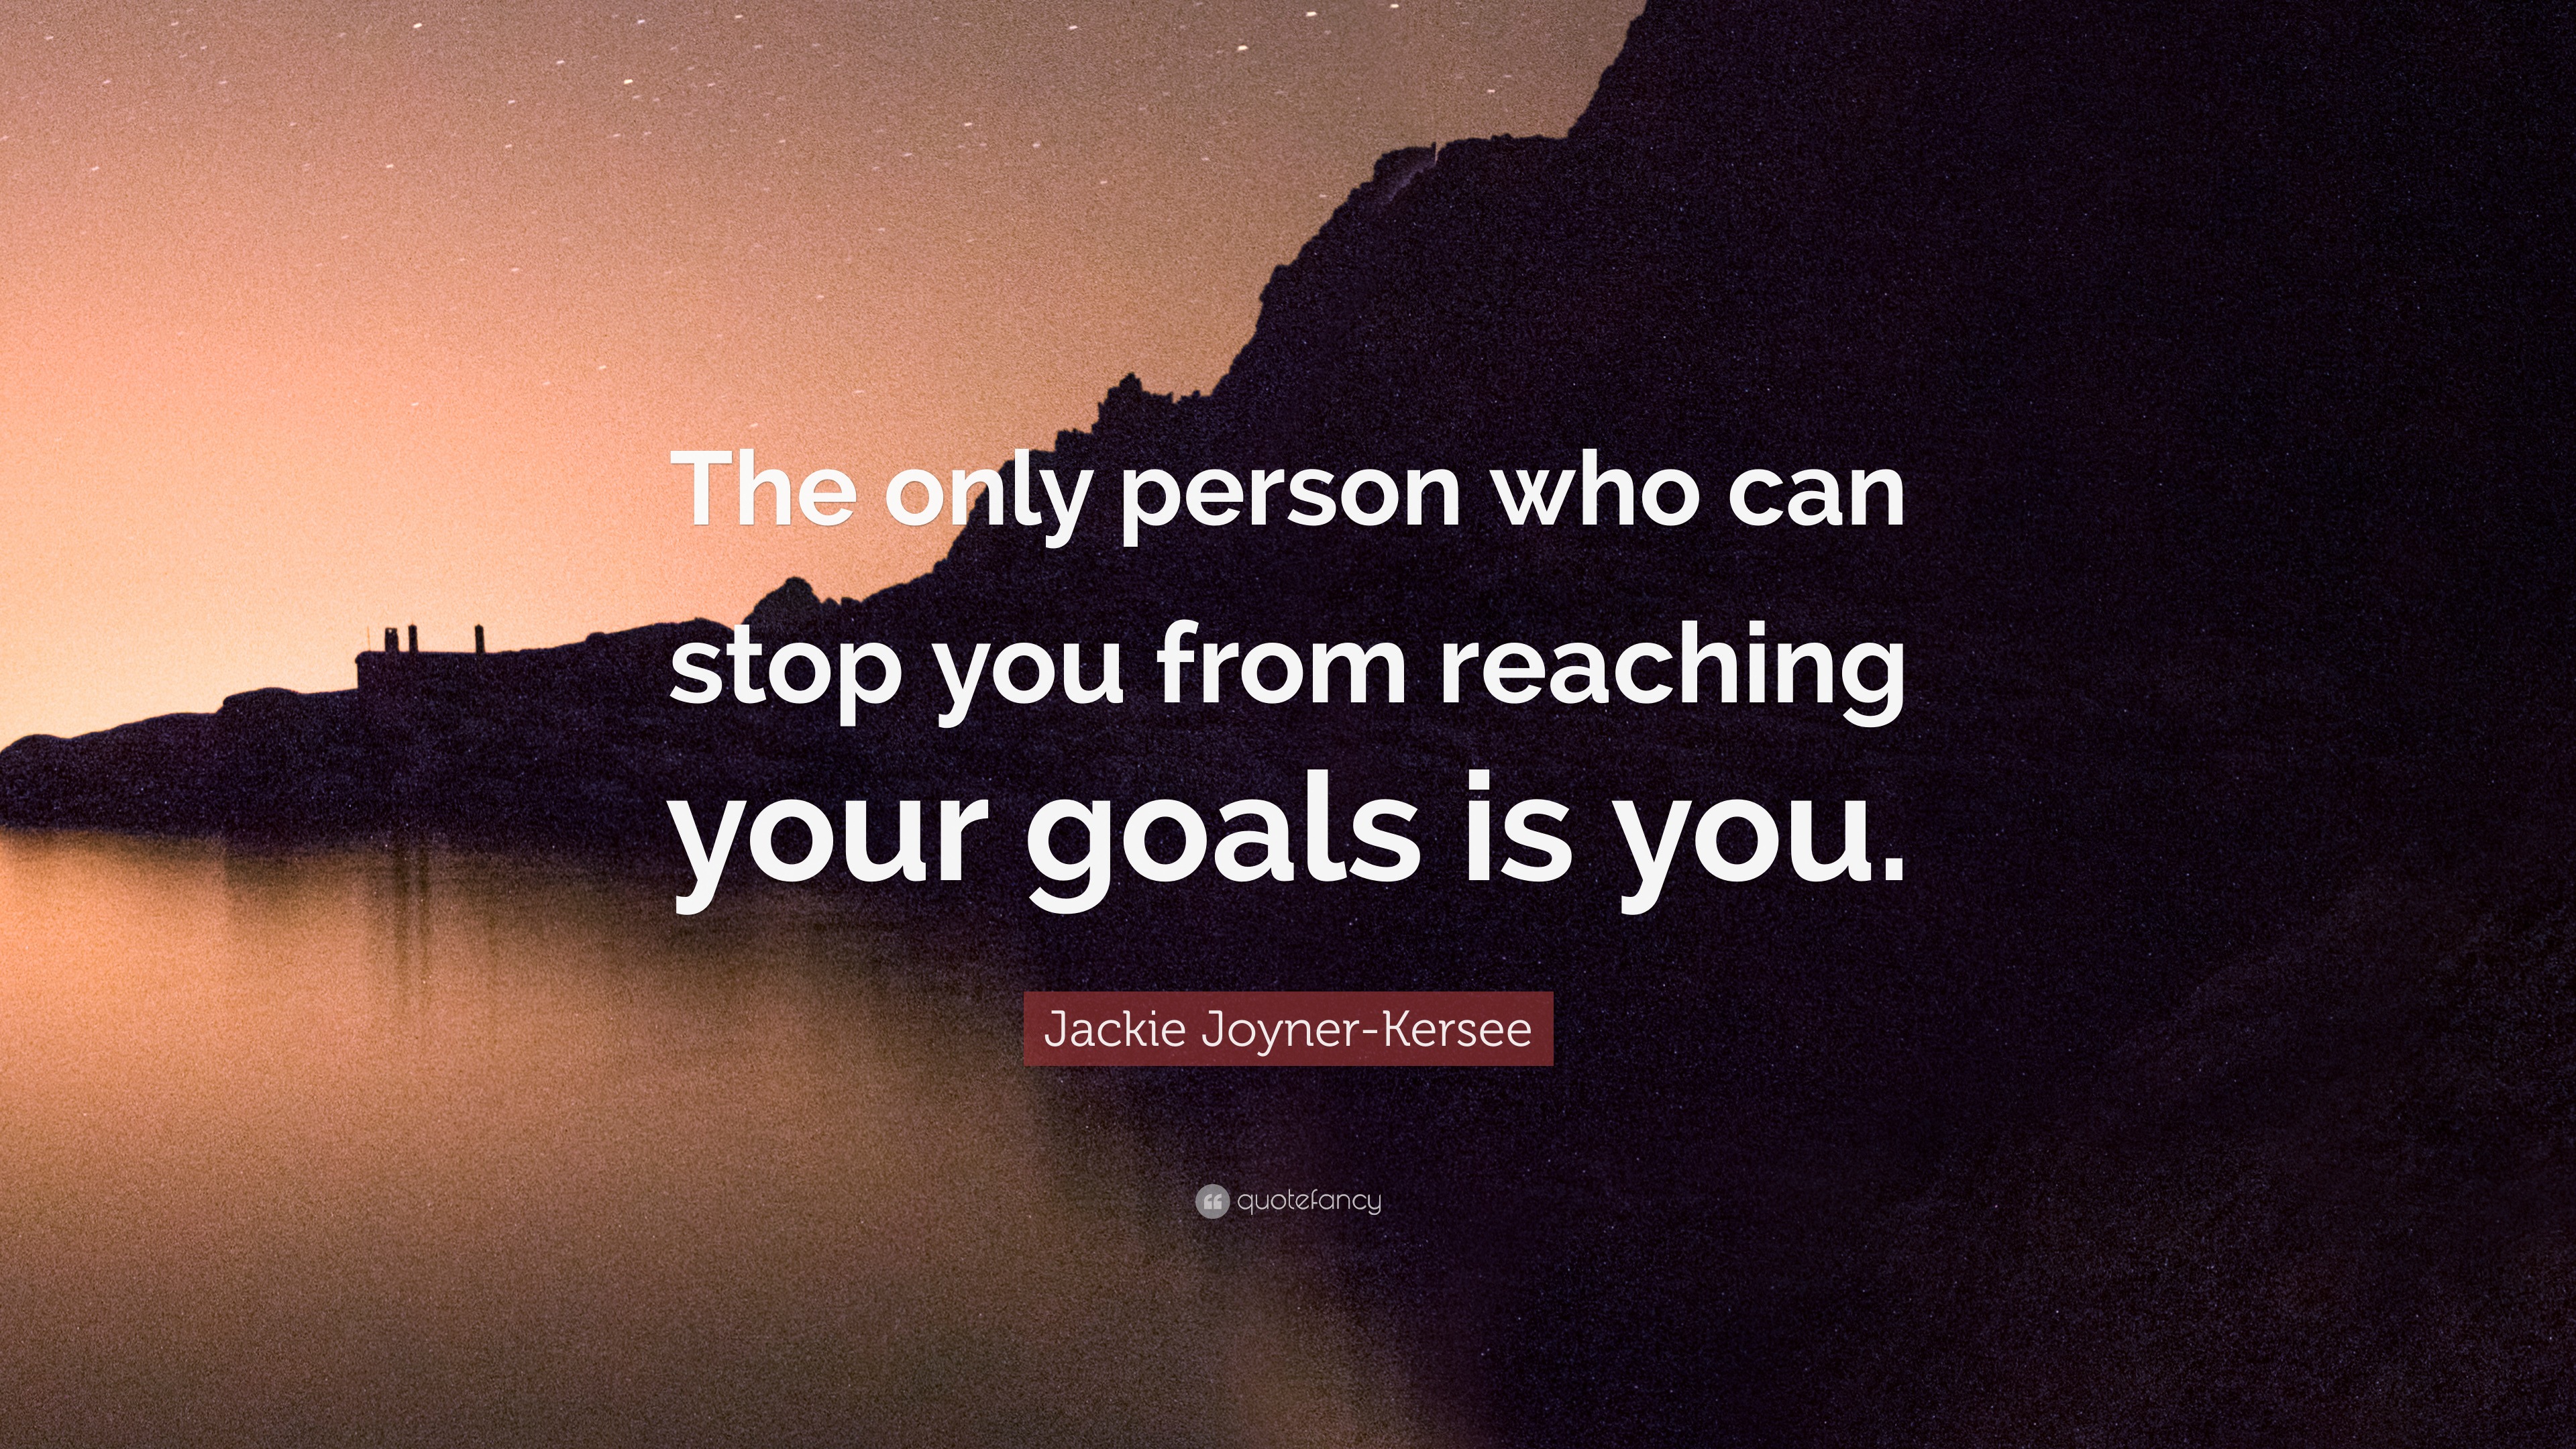 Jackie Joyner-Kersee Quote: “The only person who can stop you from